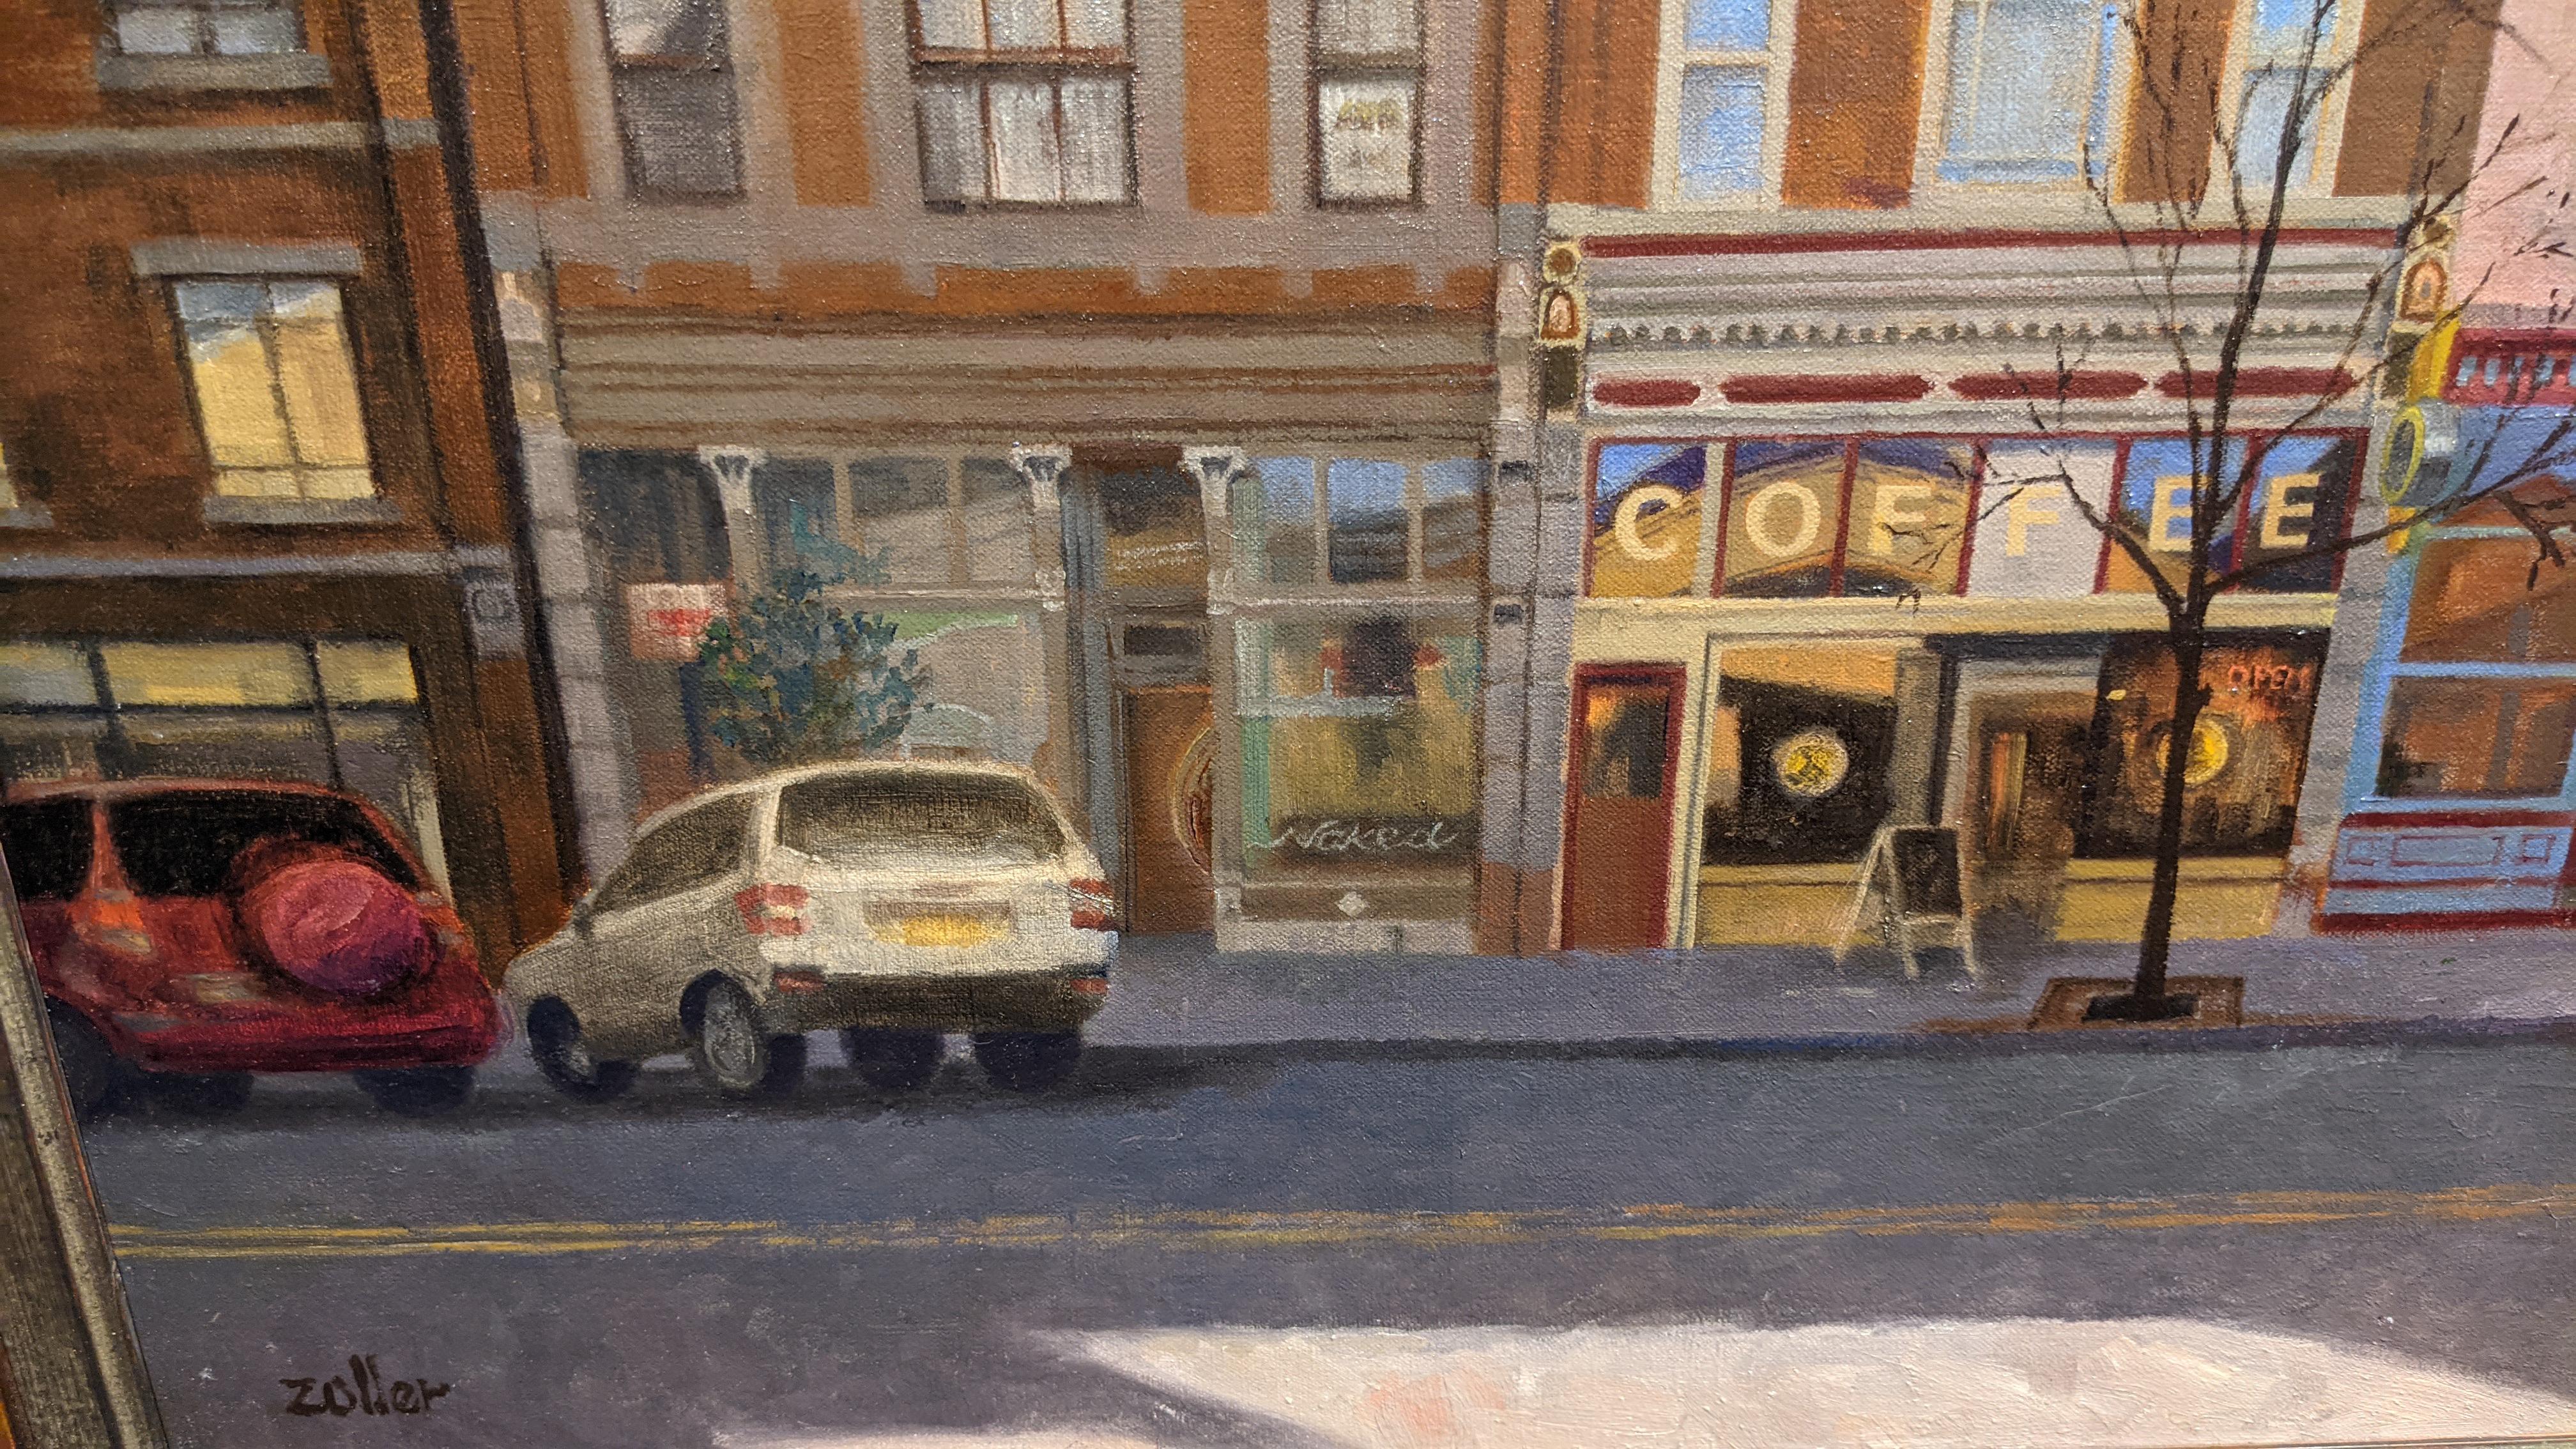 25th Street, by Elise Zoller, 24 x 30 in. oil on panel.

Elise Zoller has recently embarked on a series of plein air paintings of sites around Salt Lake City and in the smaller towns of Utah from Hurricane to Huntsville.  She has enjoyed meeting